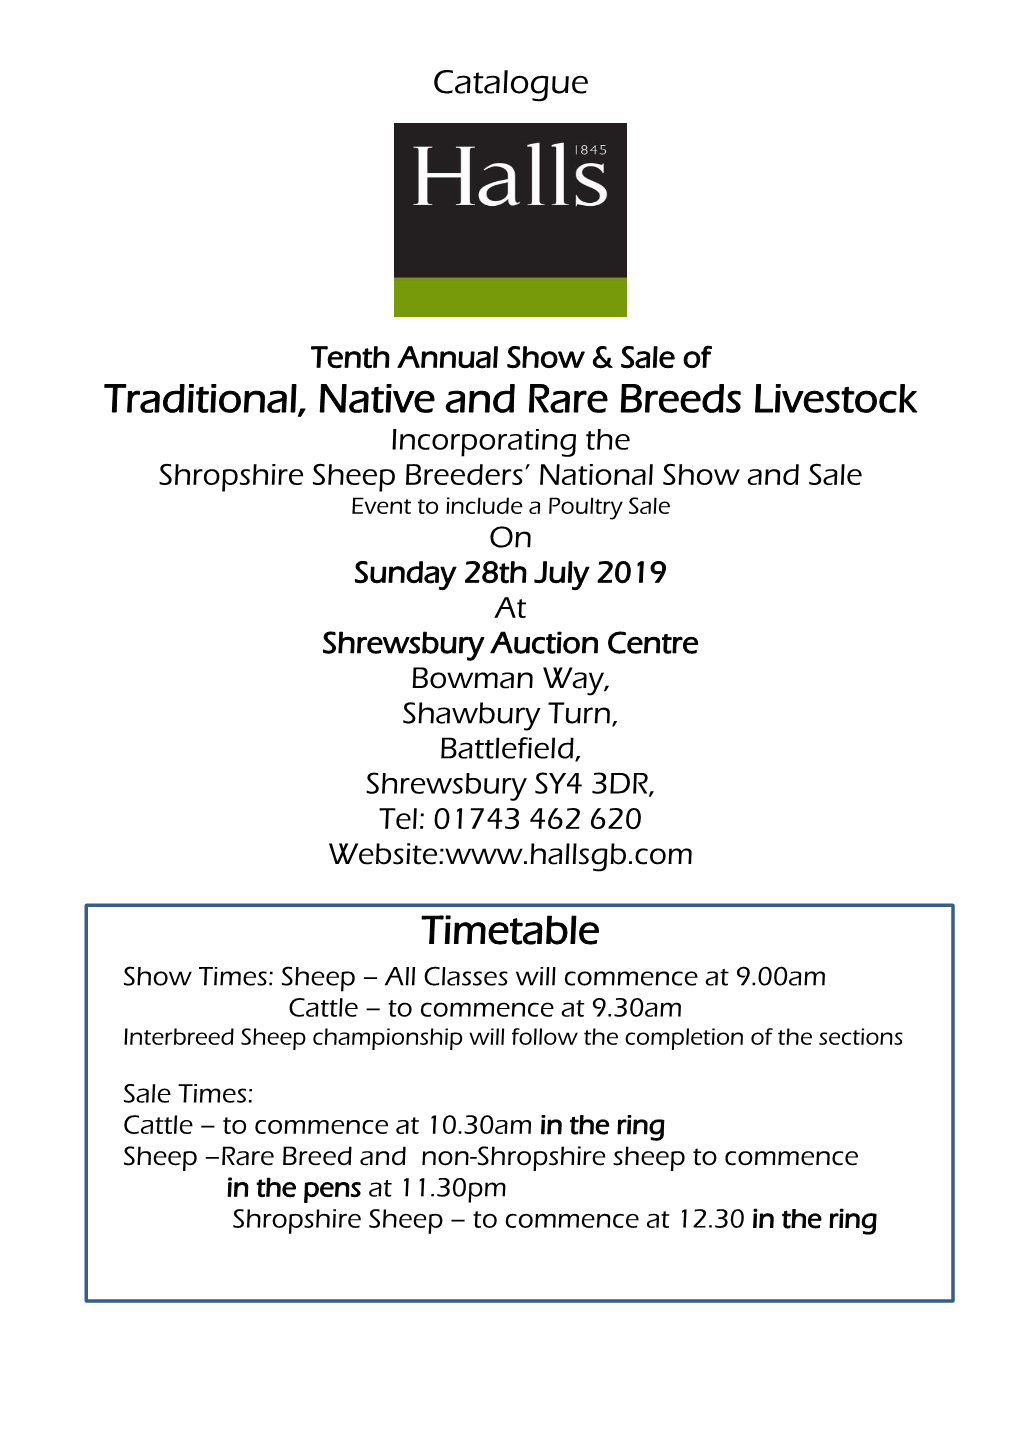 Traditional, Native and Rare Breeds Livestock Timetable